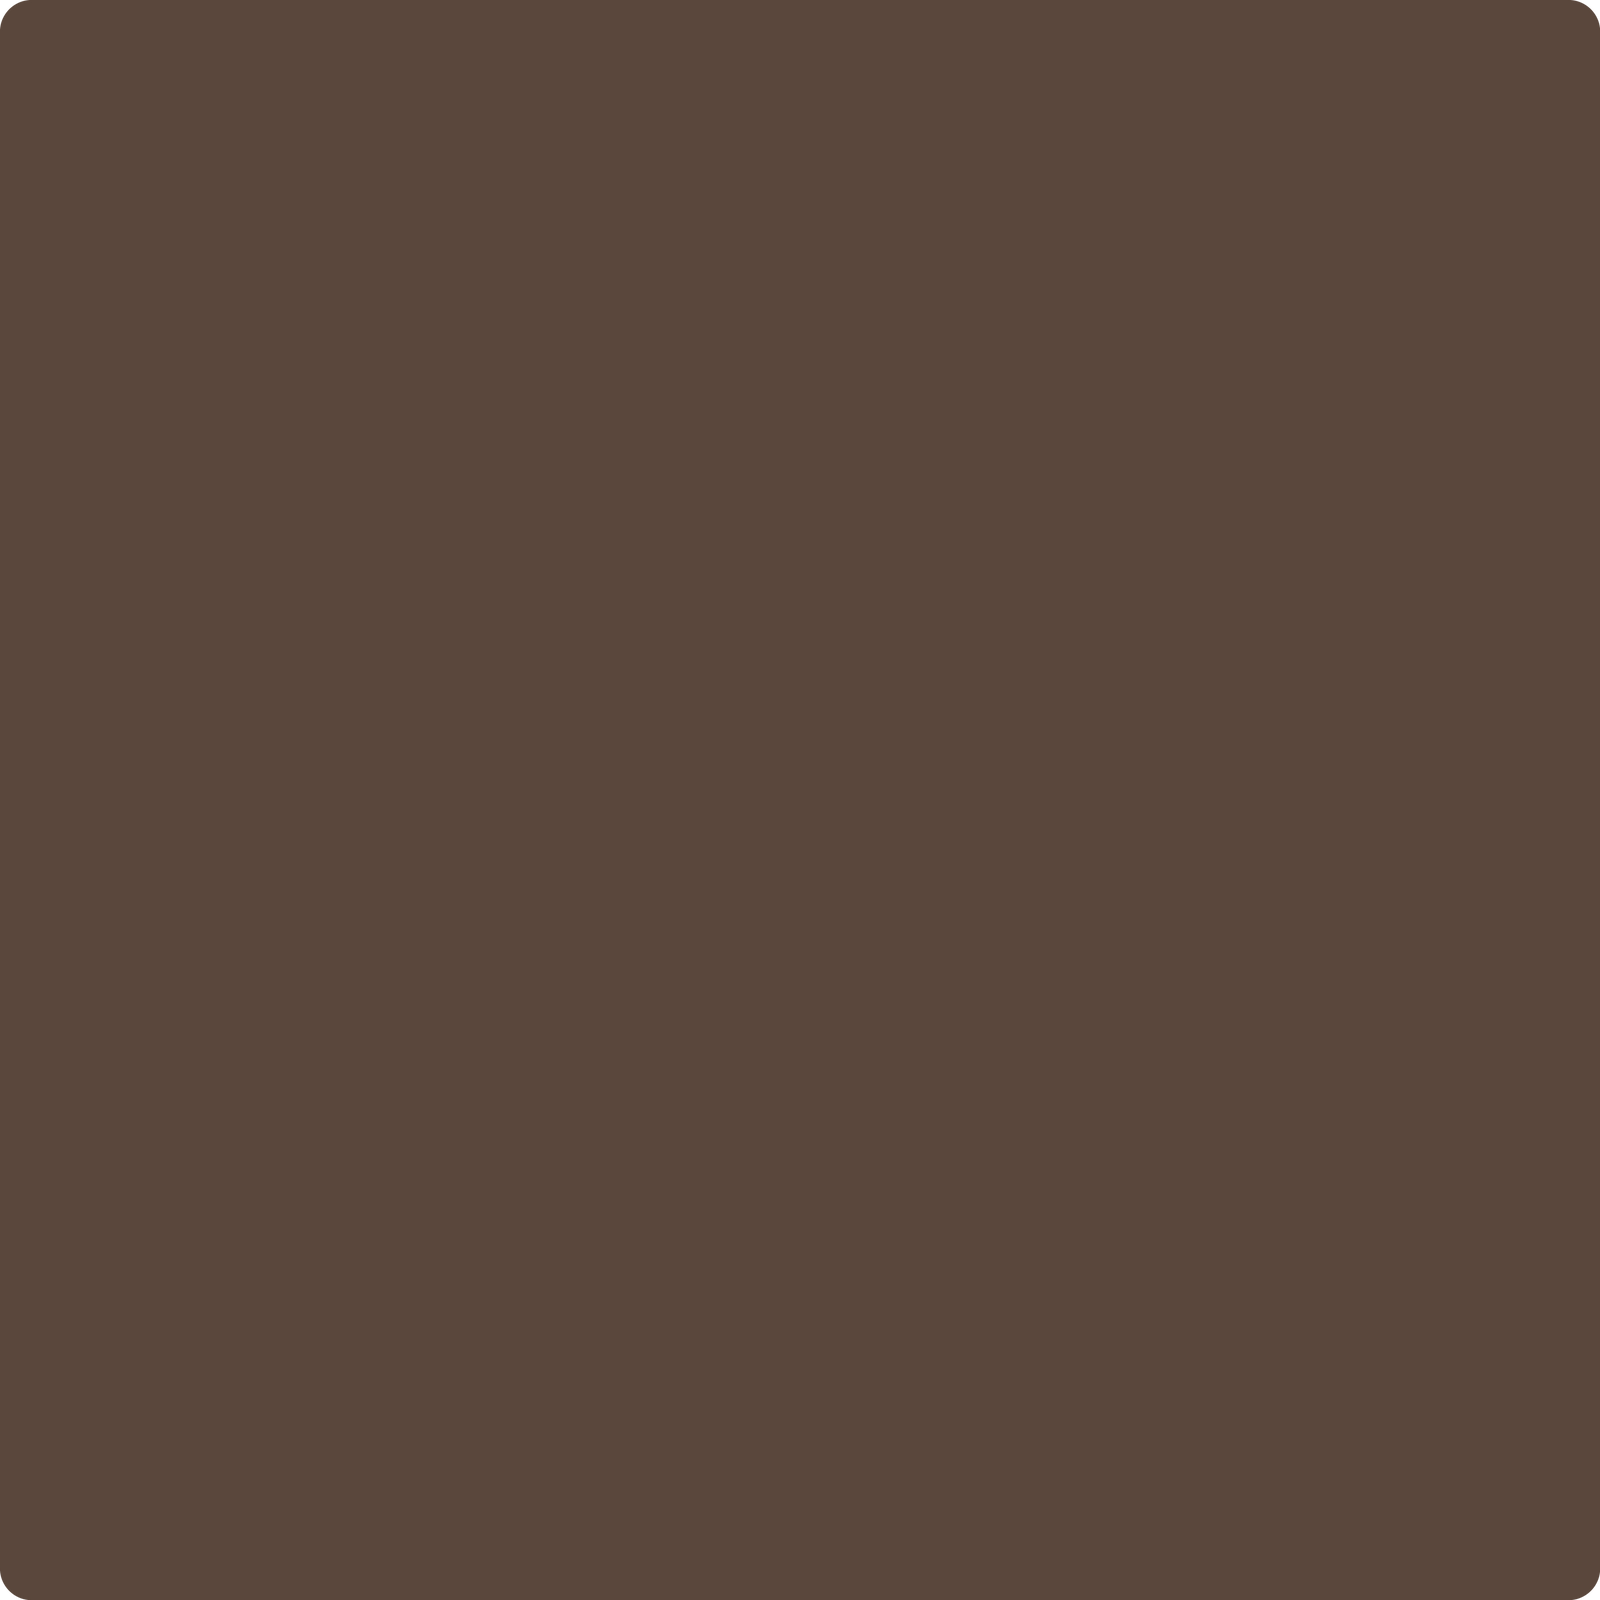 Chocolate Brown Color